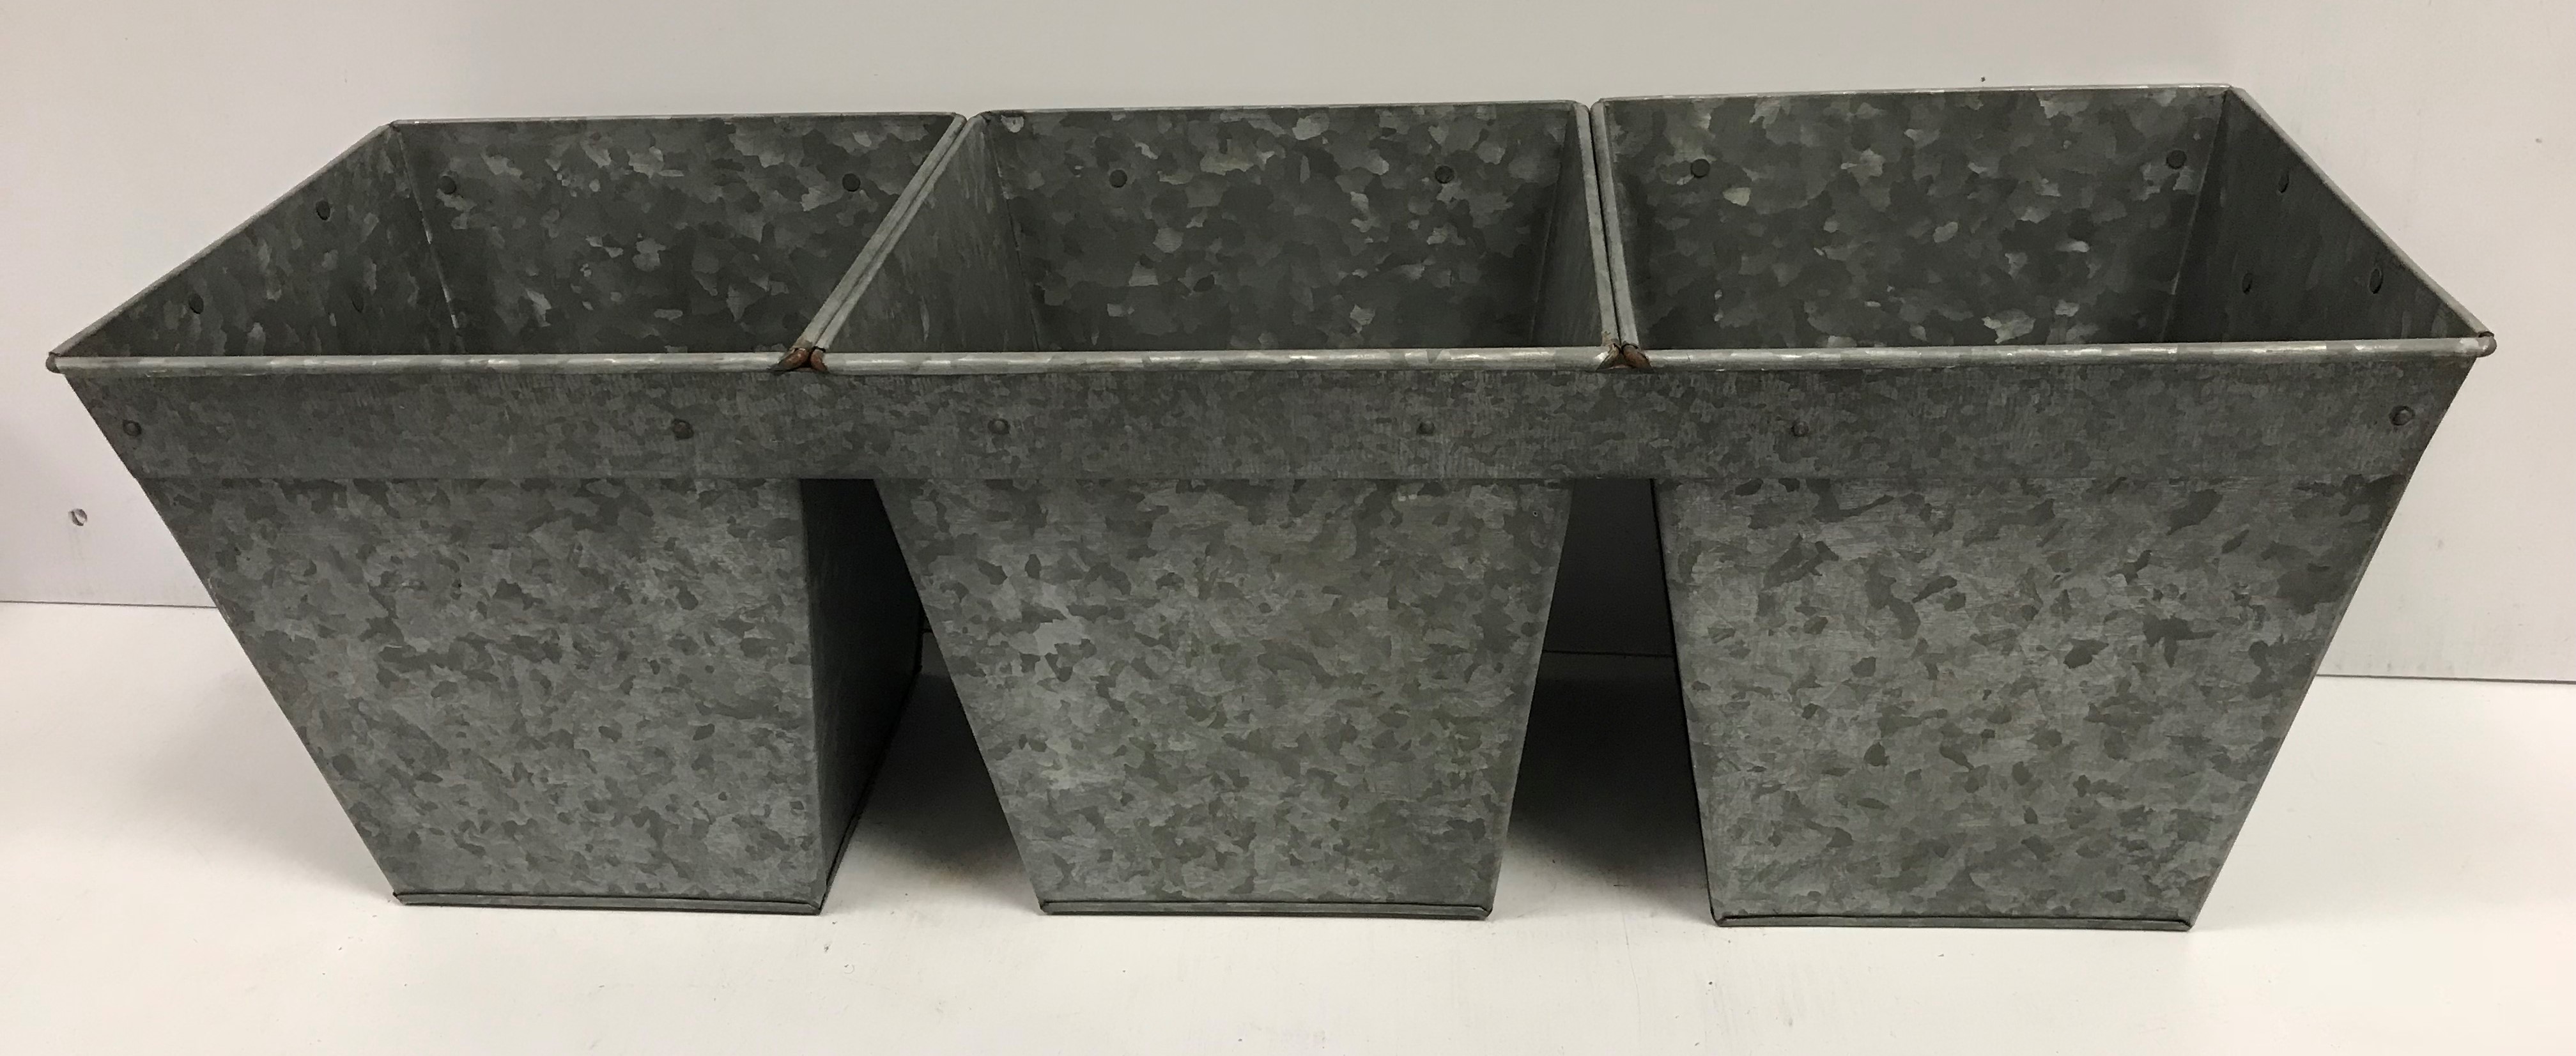 A set of three interconnected galvanised planters - Image 2 of 2